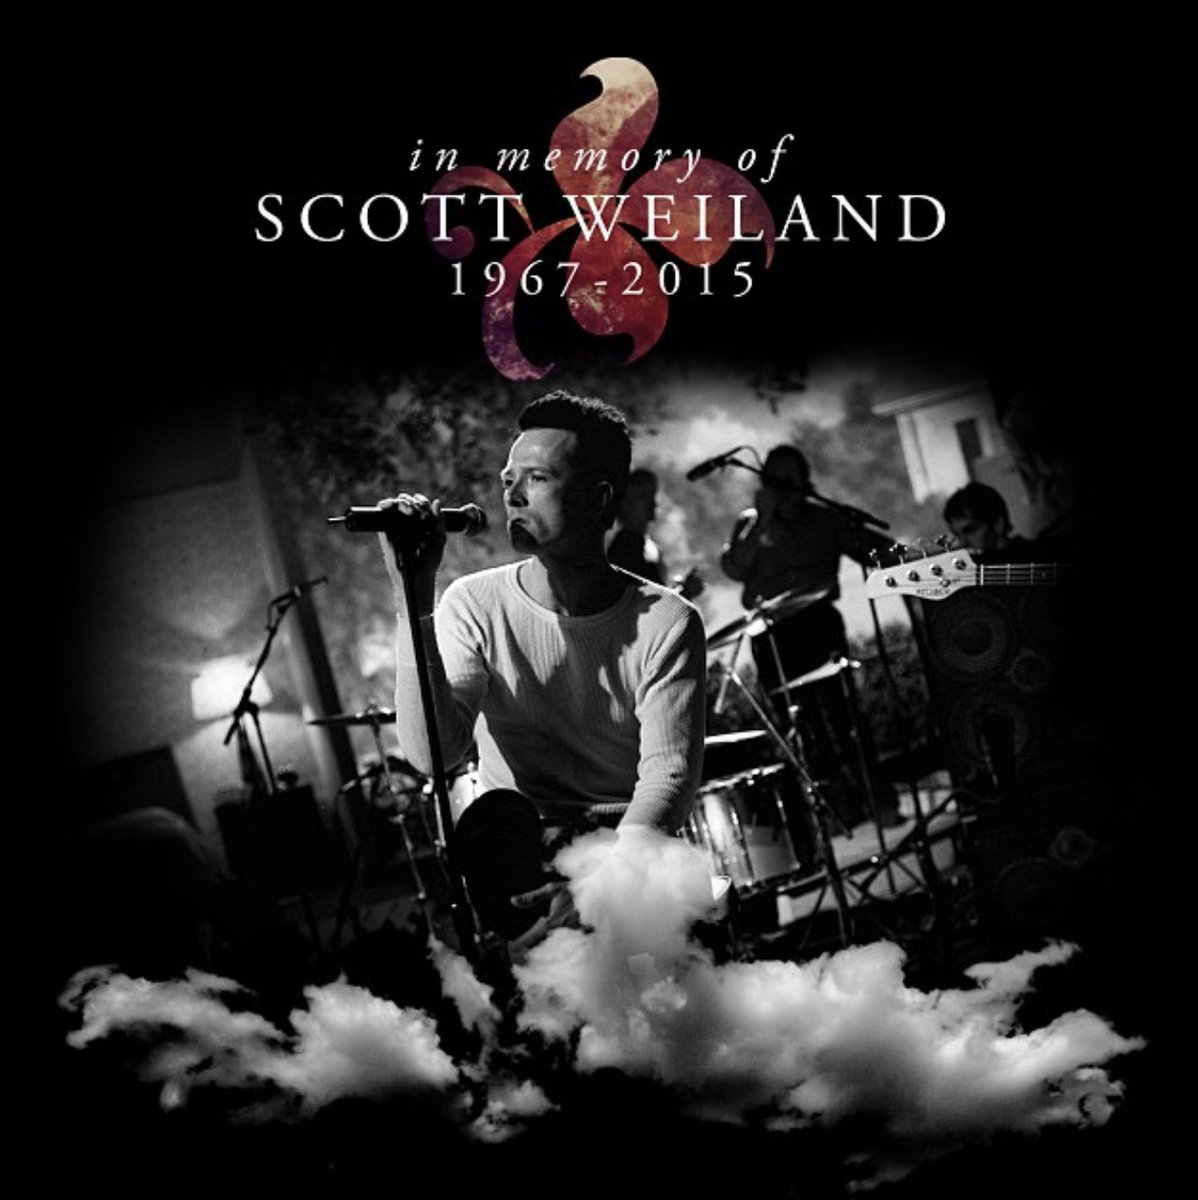 Stone Temple Pilots singer Scott Weiland died 8 years ago today. 💔